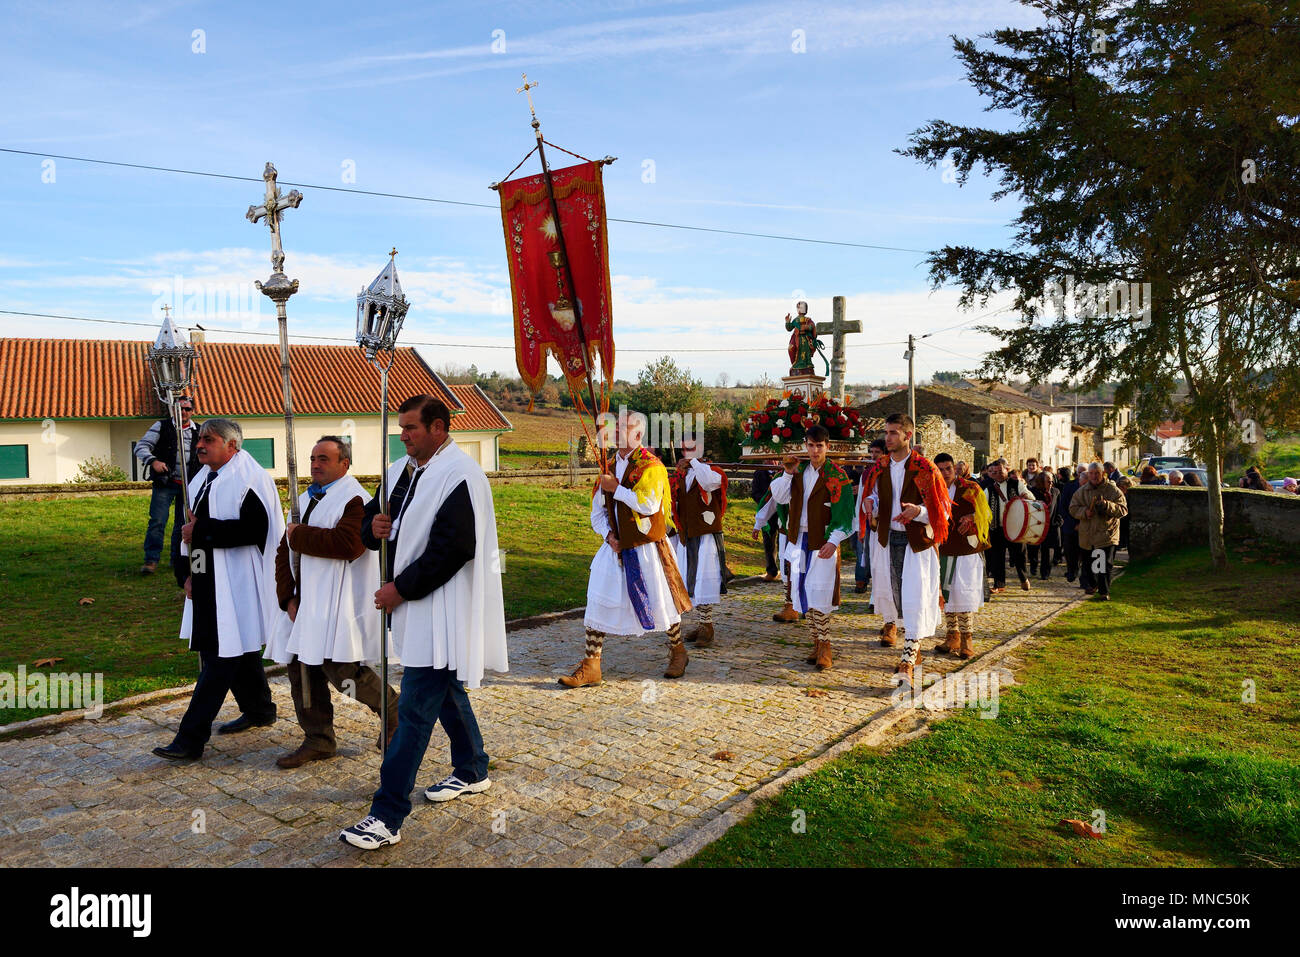 The procession during the Winter Solstice Festivities in Constantim. Tras-os-Montes, Portugal Stock Photo